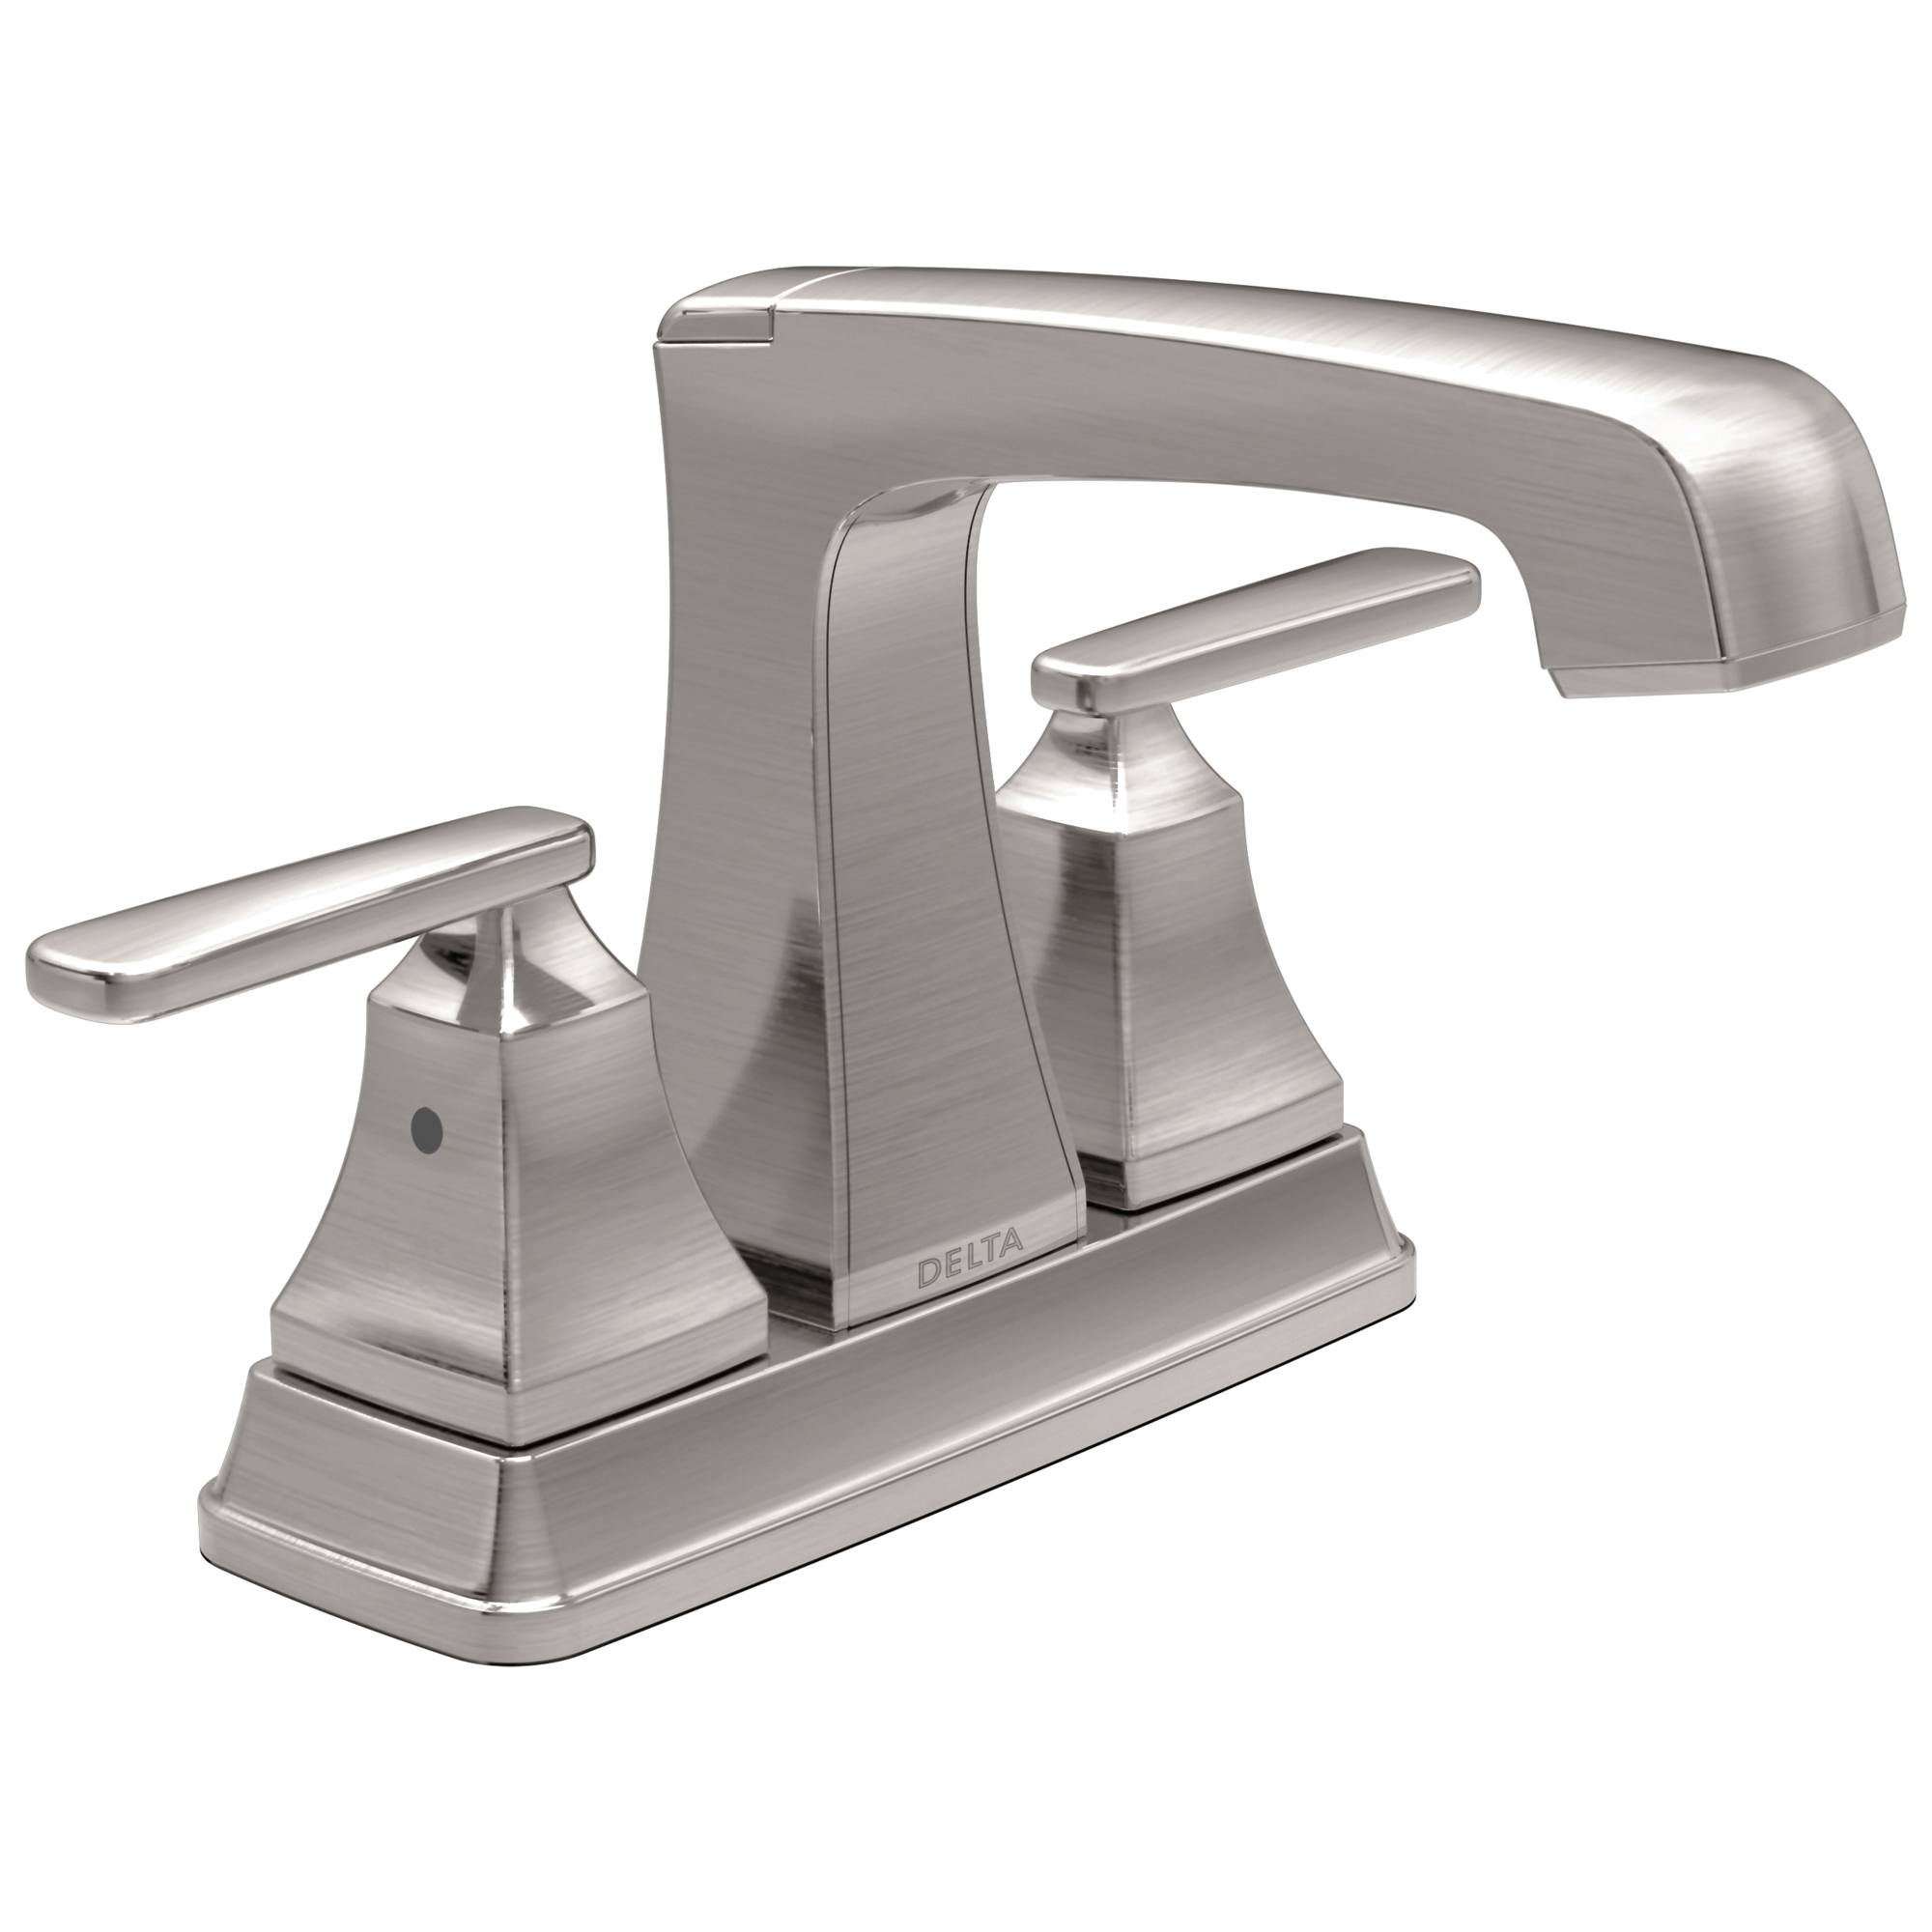 DELTA® 2564-SSTP-DST Tract-Pack™ Centerset Lavatory Faucet, Ashlyn®, Stainless Steel, 2 Handles, 50/50 Pop-Up Drain, 1.2 gpm